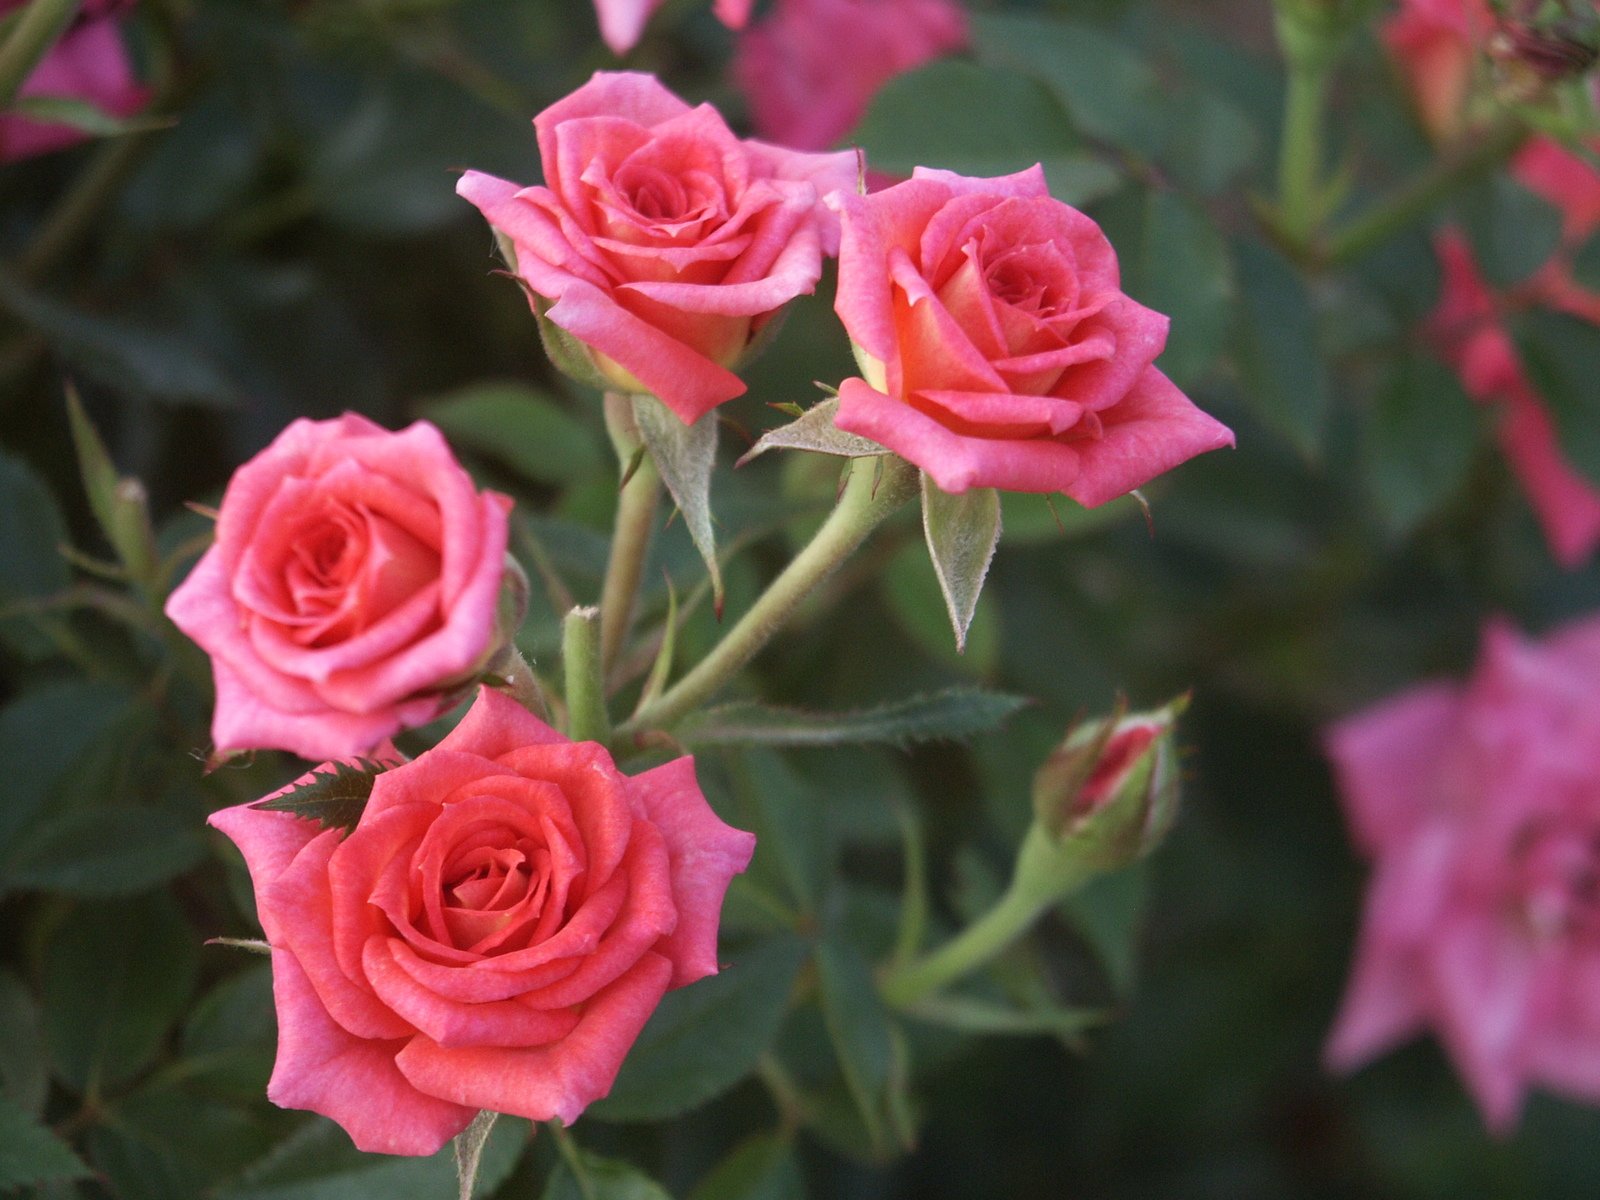 some pink roses blooming in a garden